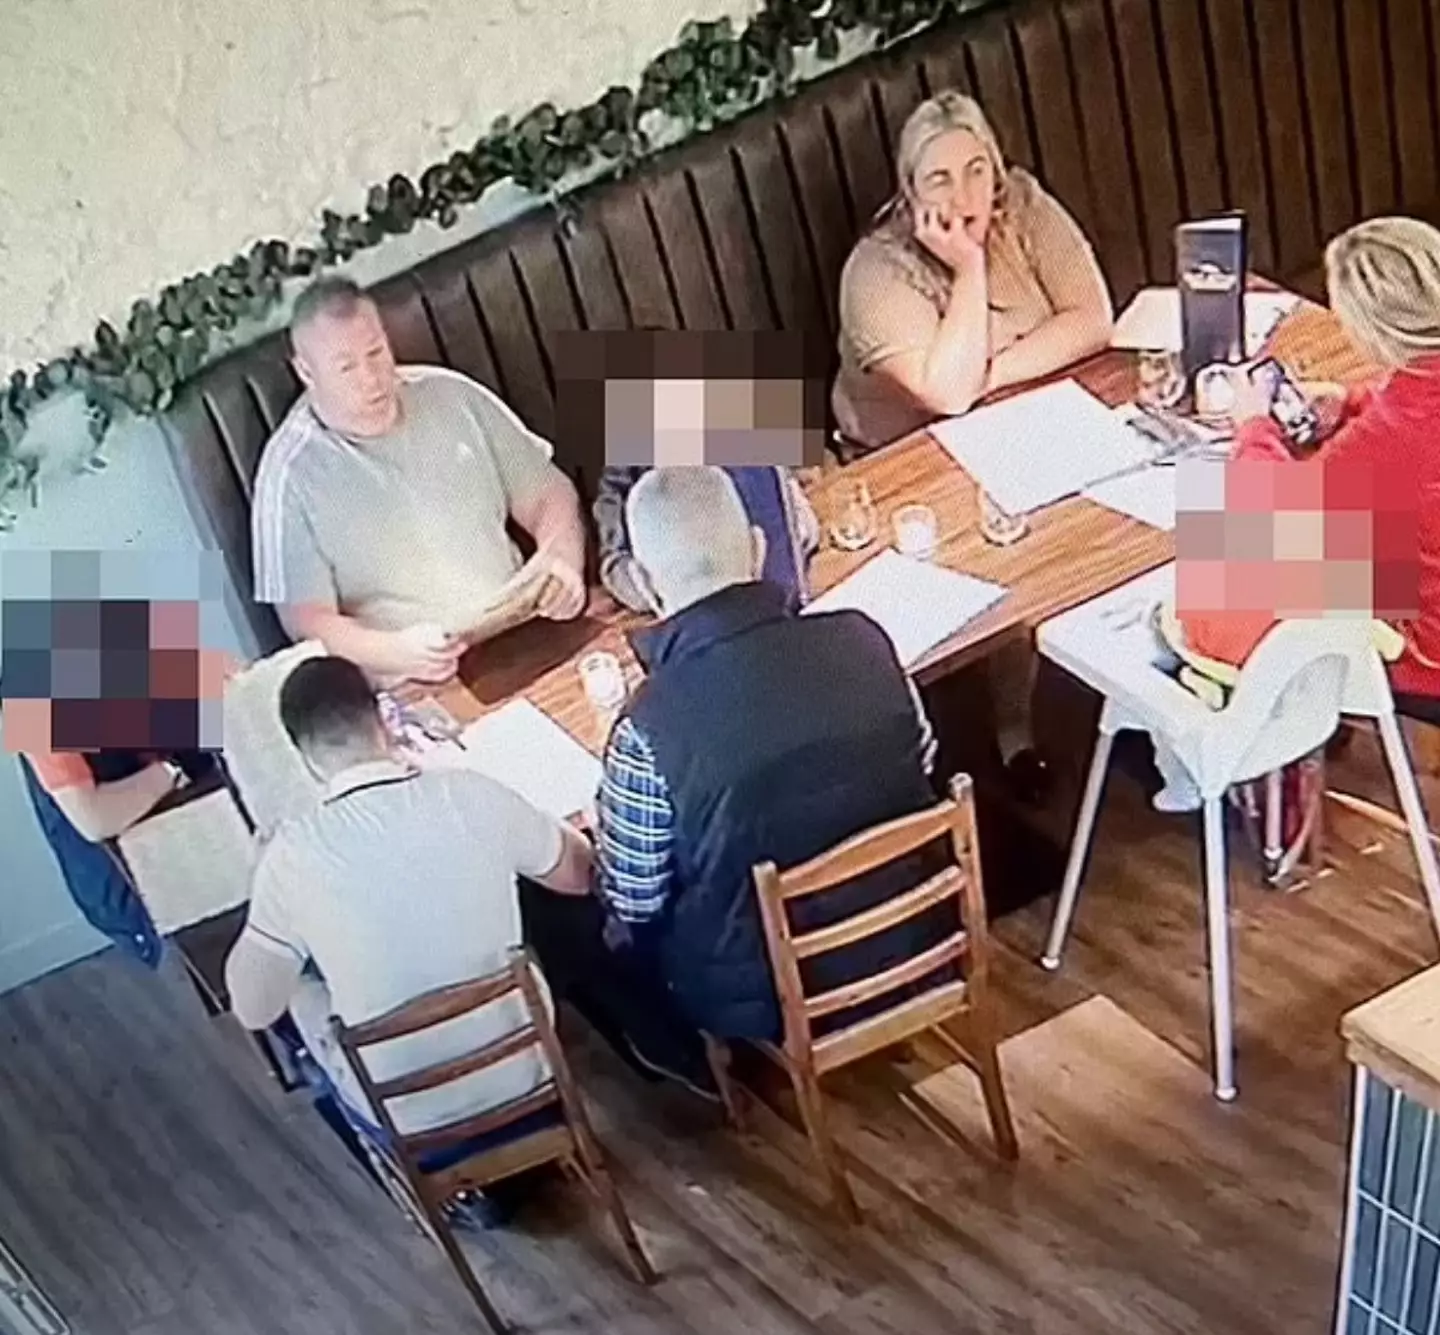 The restaurant shared pictures of the family and accused them of dining and dashing. (Facebook/Bella Ciao Swansea)